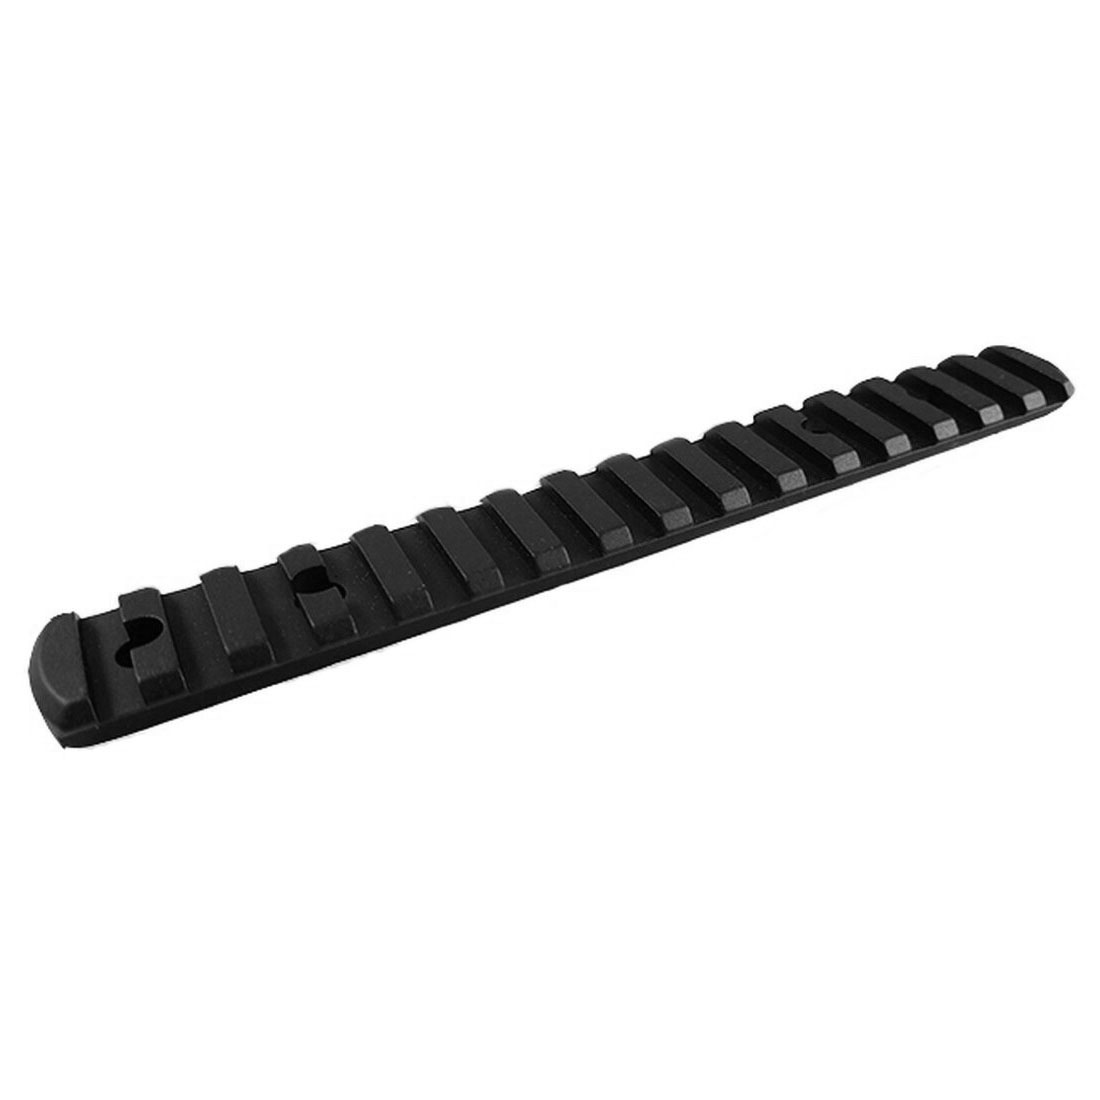 Will these rails fit the Tikka Tac A1?